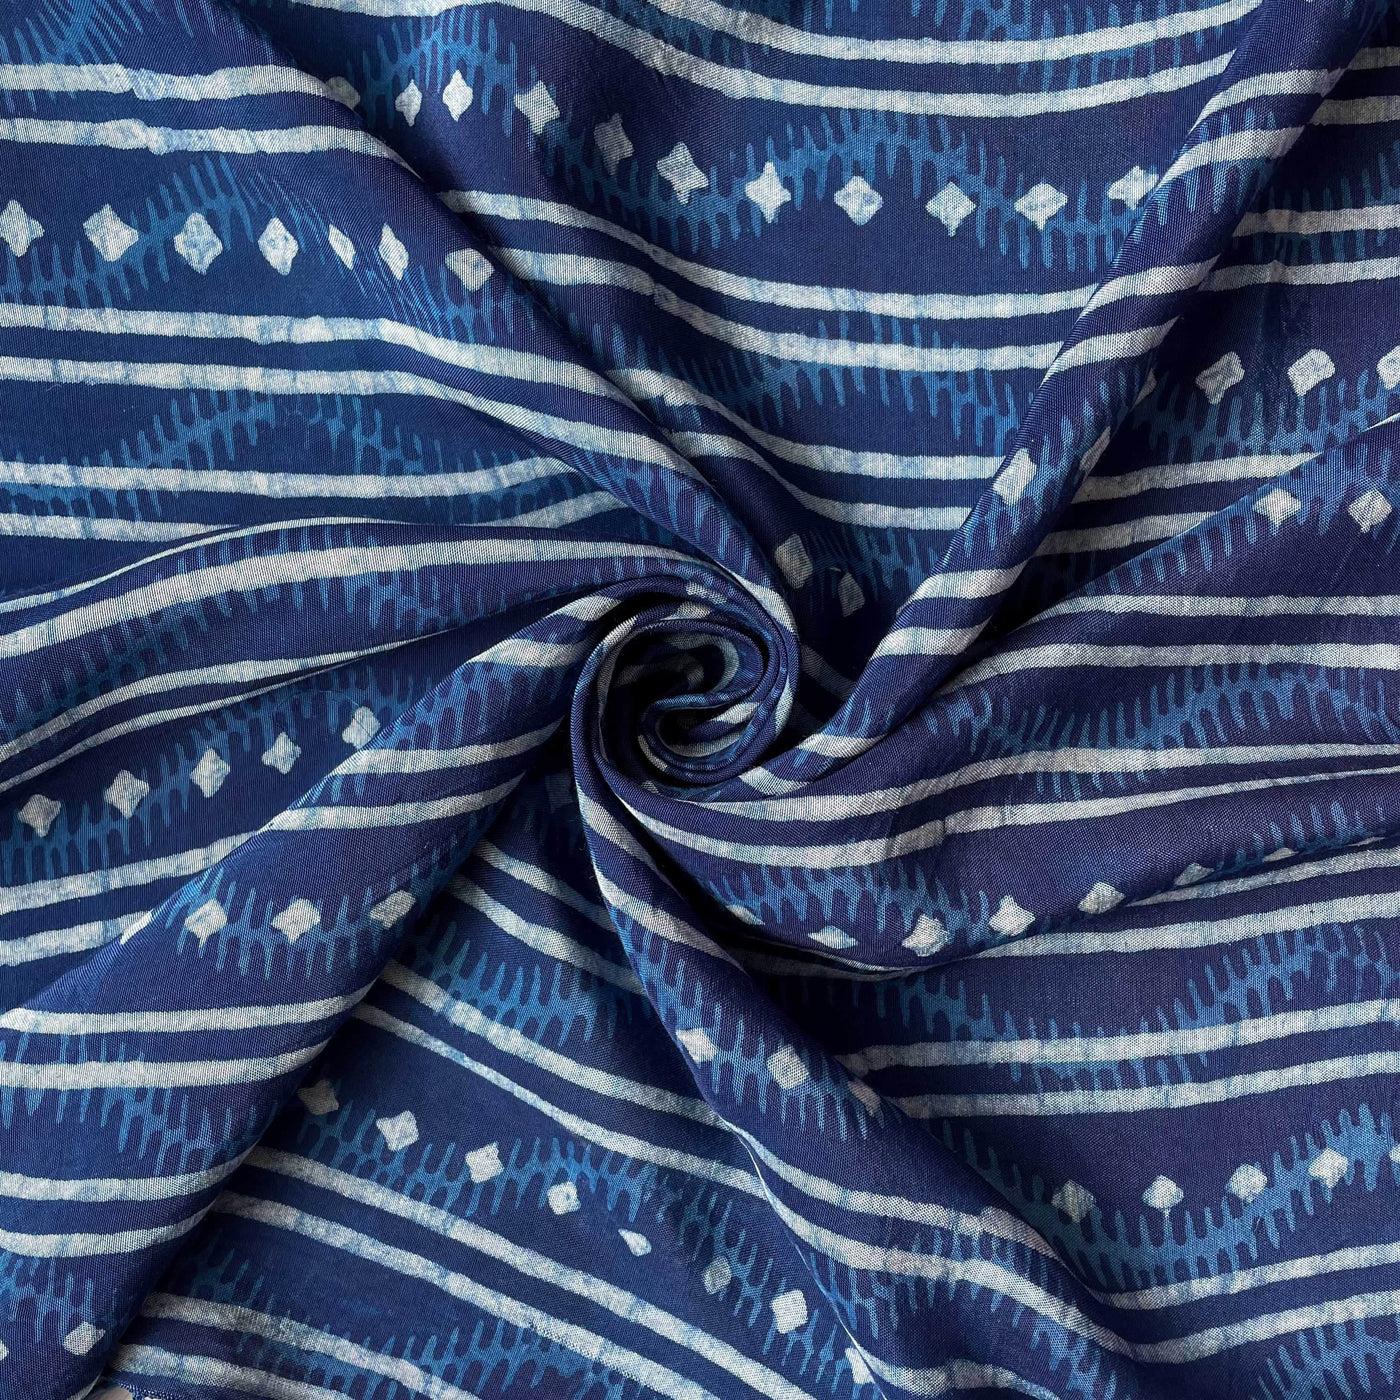 Hand Block Printed Cotton Fabric Fabric Indigo Dabu Natural Dyed Tribal Stripes Hand Block Printed Pure Crepe Fabric (Width 45 Inches)